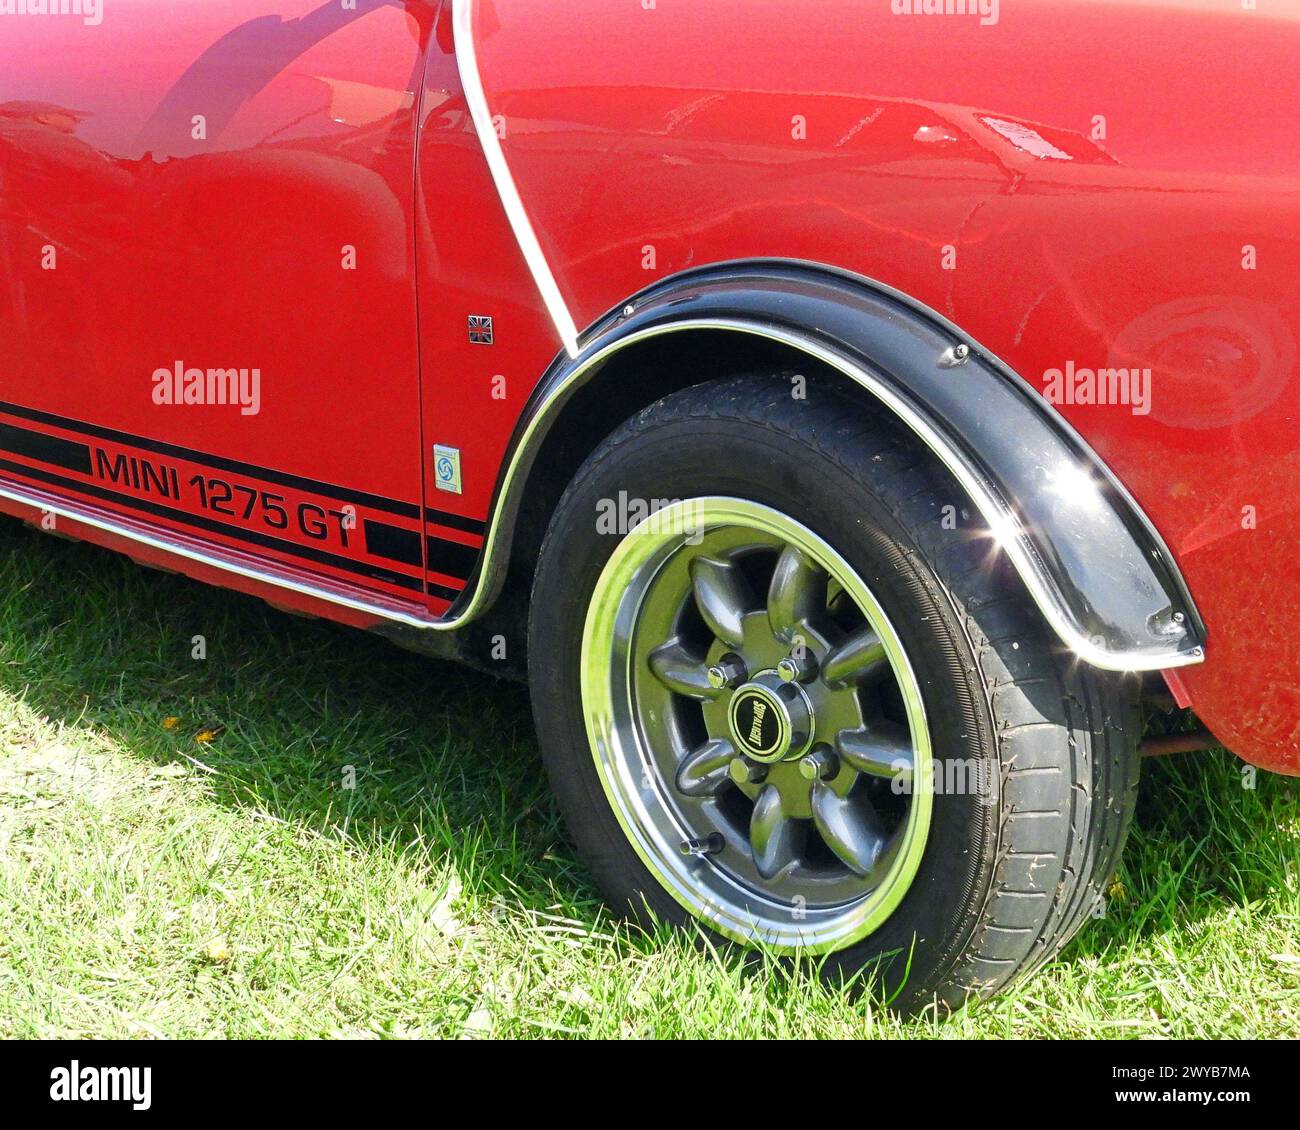 Side view of a classic Mini 1275 GT car in red and showing the front wheel and side trim Stock Photo